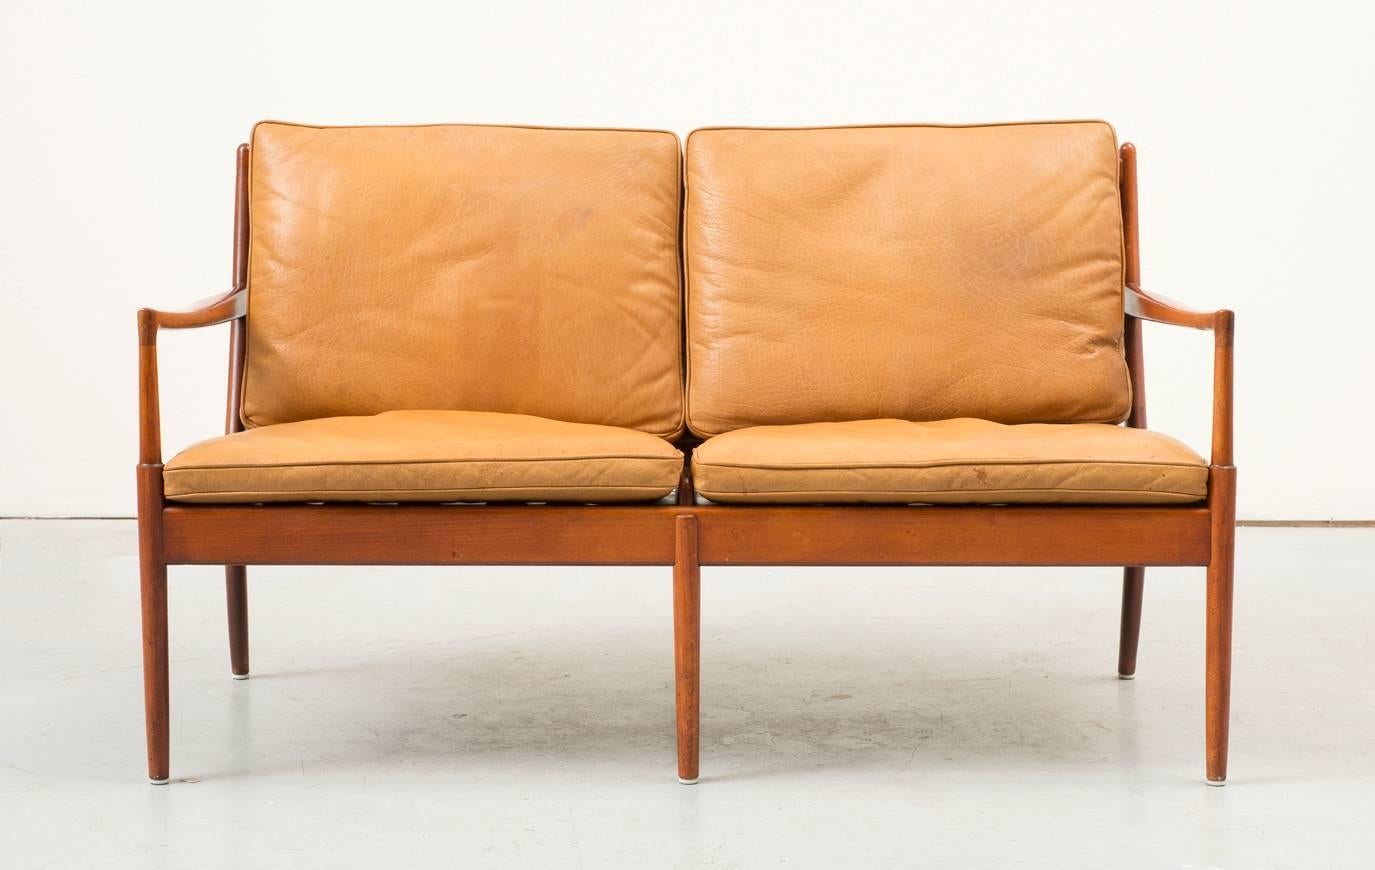 Beautiful example of this rare settee in beech and gorgeous carmel leather. Excellent vintage condition with minimal signs of use and wonderful patina.
       